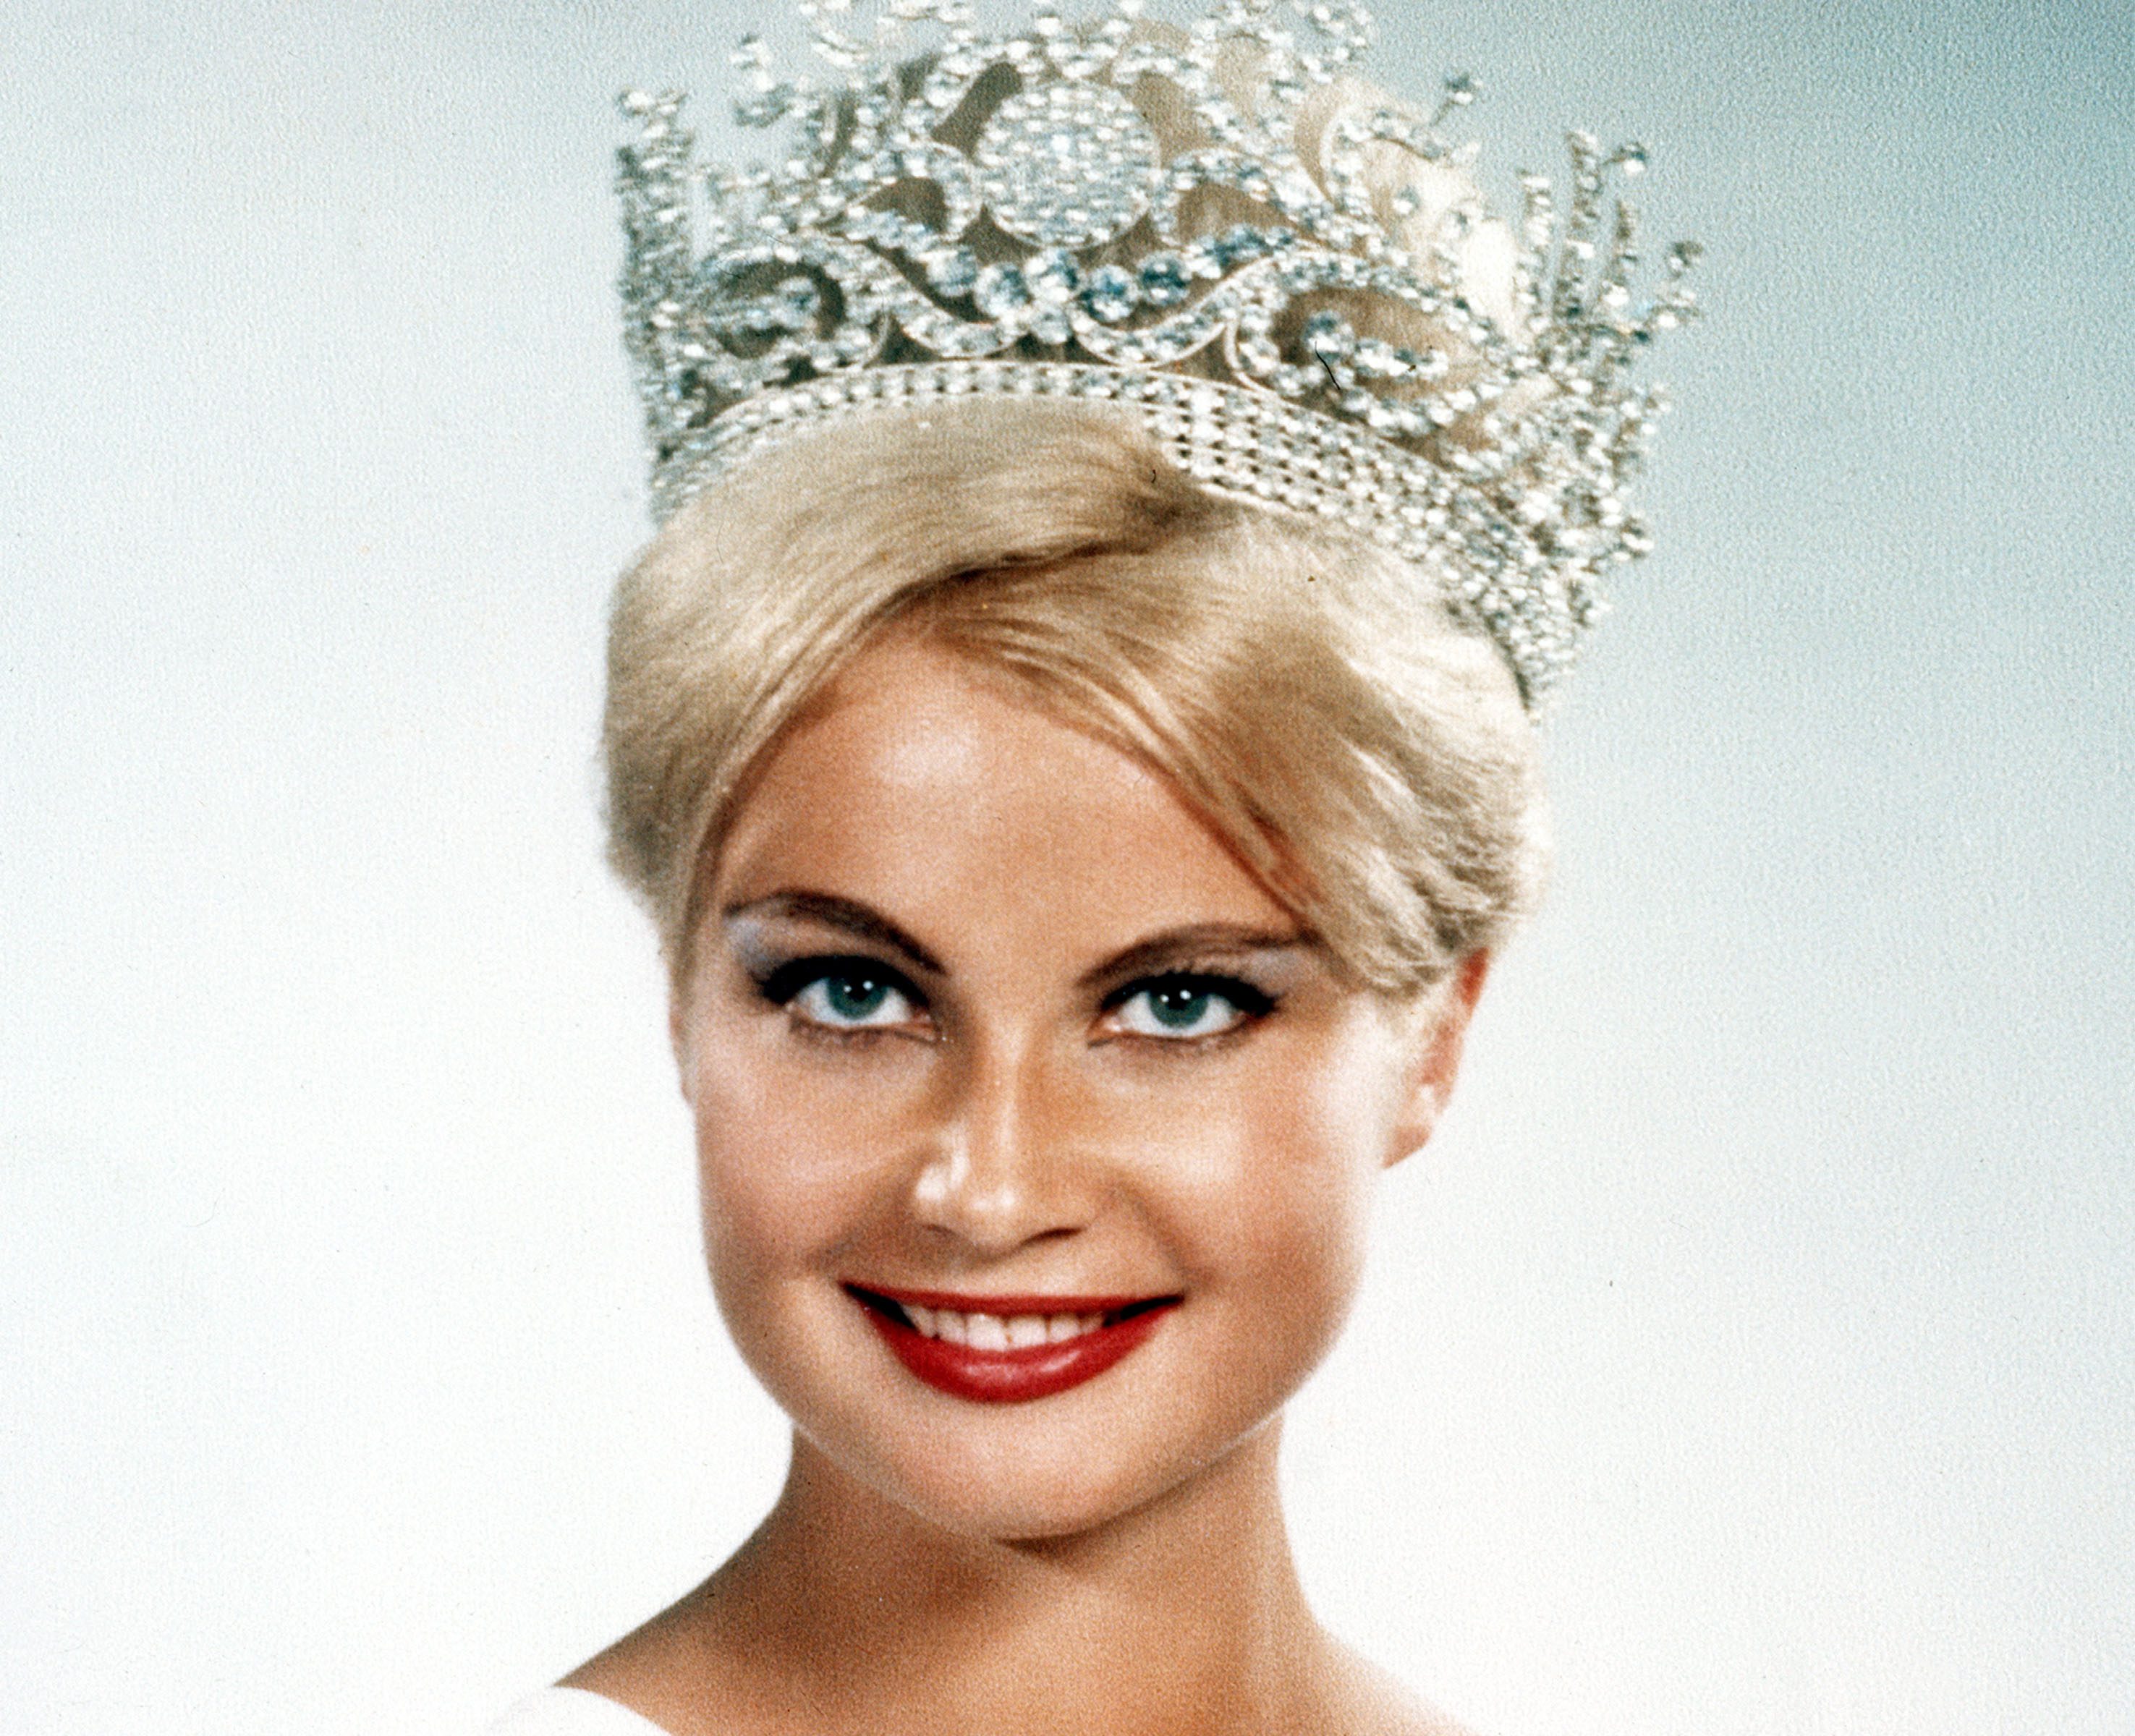 MISS UNIVERSE 1961. Marlene Schmidt, the first Miss Universe from Germany, won her title in Miami Beach, Florida. Photo from Miss Universe Organization 